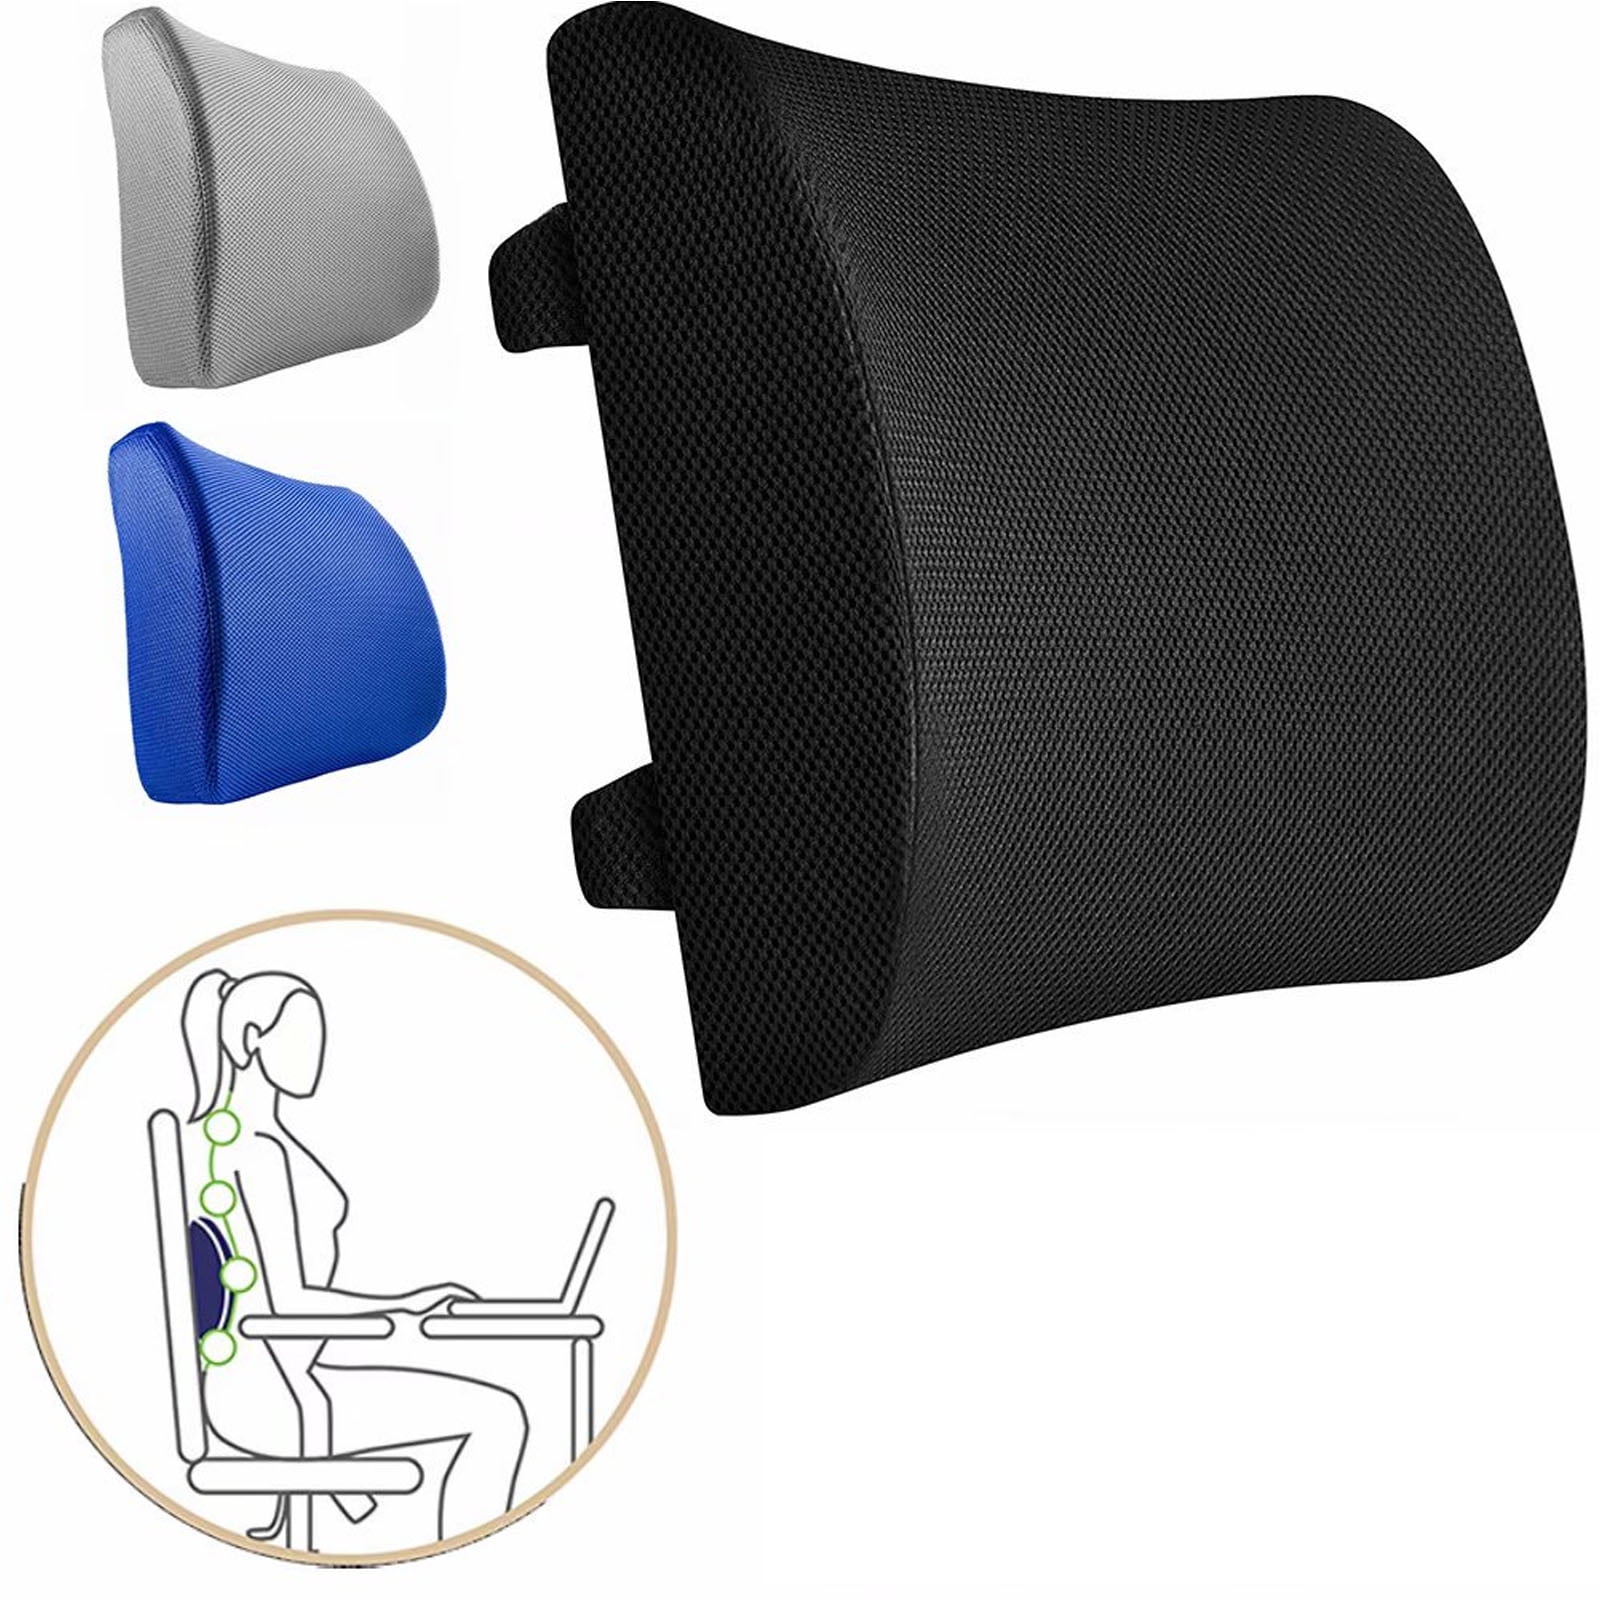 Icozyhome Coccyx Seat Cushion & Lumbar Support Pillow for Office Desk Chair Black Memory Foam Car Seat Cushion, Size: Standard